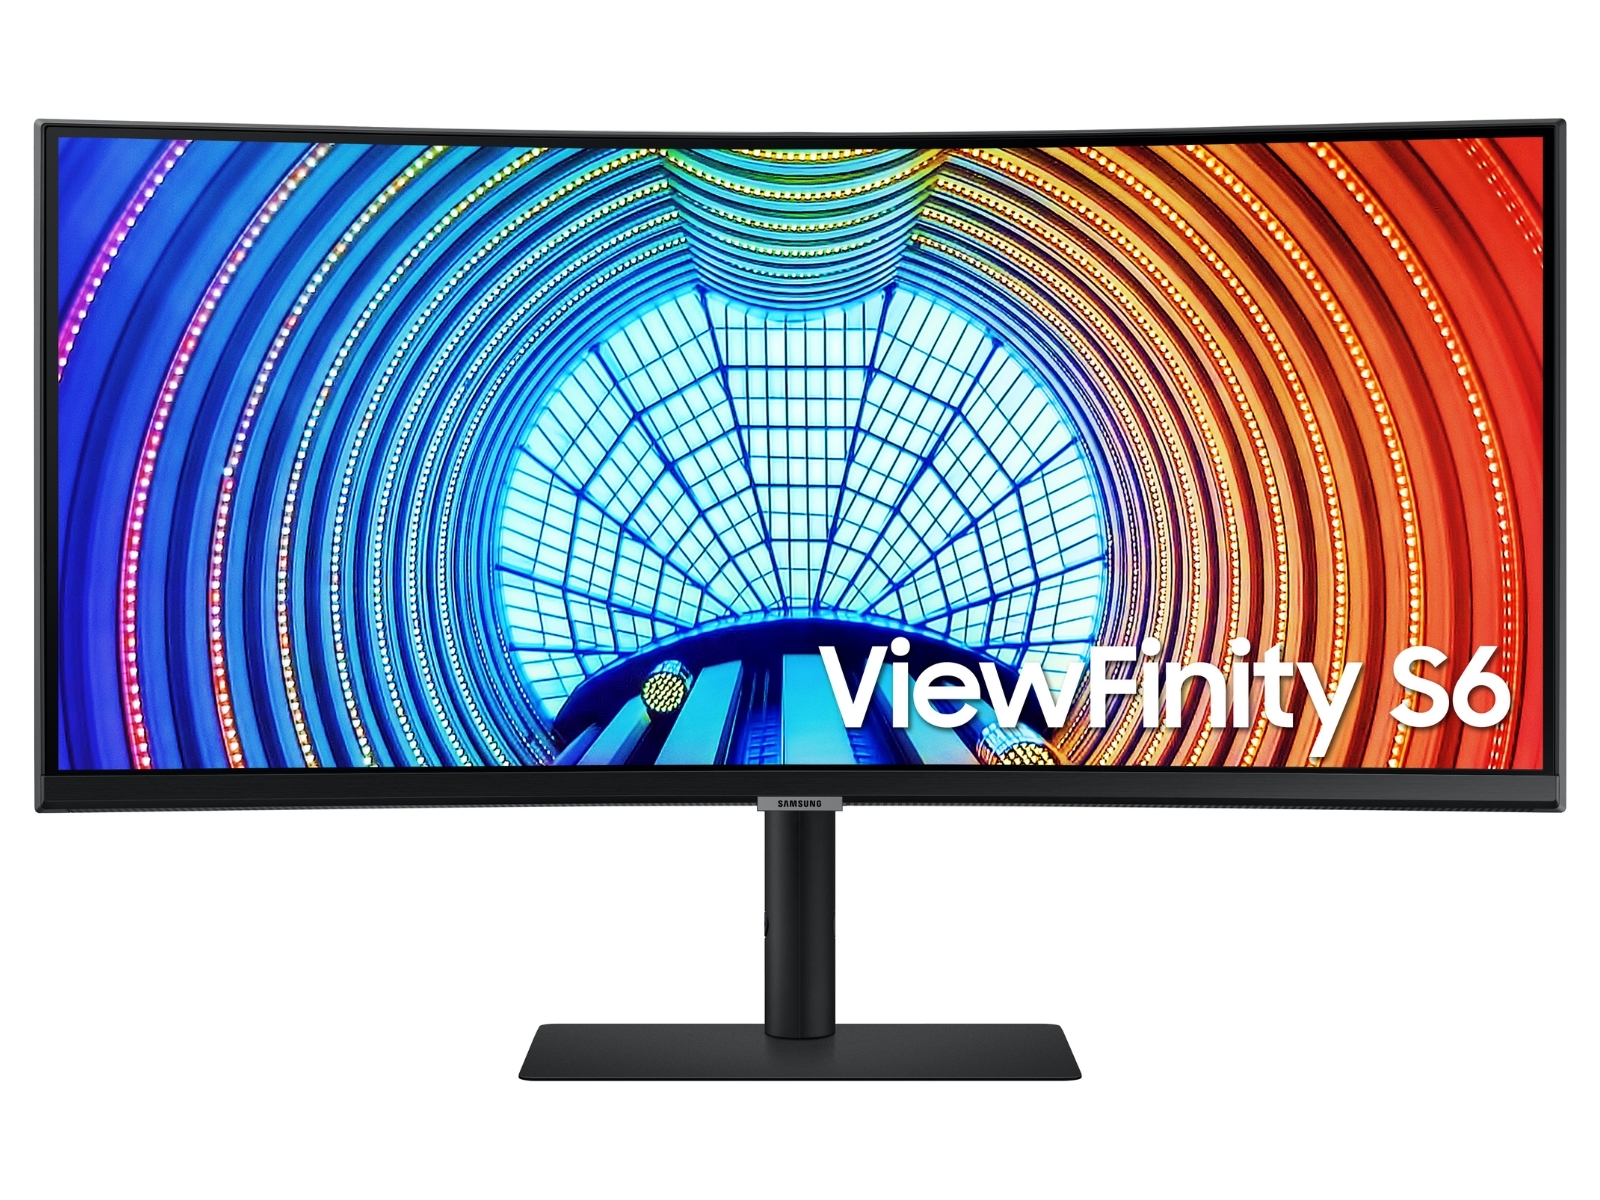 34” ViewFinity Ultra WQHD High Resolution Monitor with 1000R Curvature and  USB-C - LS34A650UXNXGO